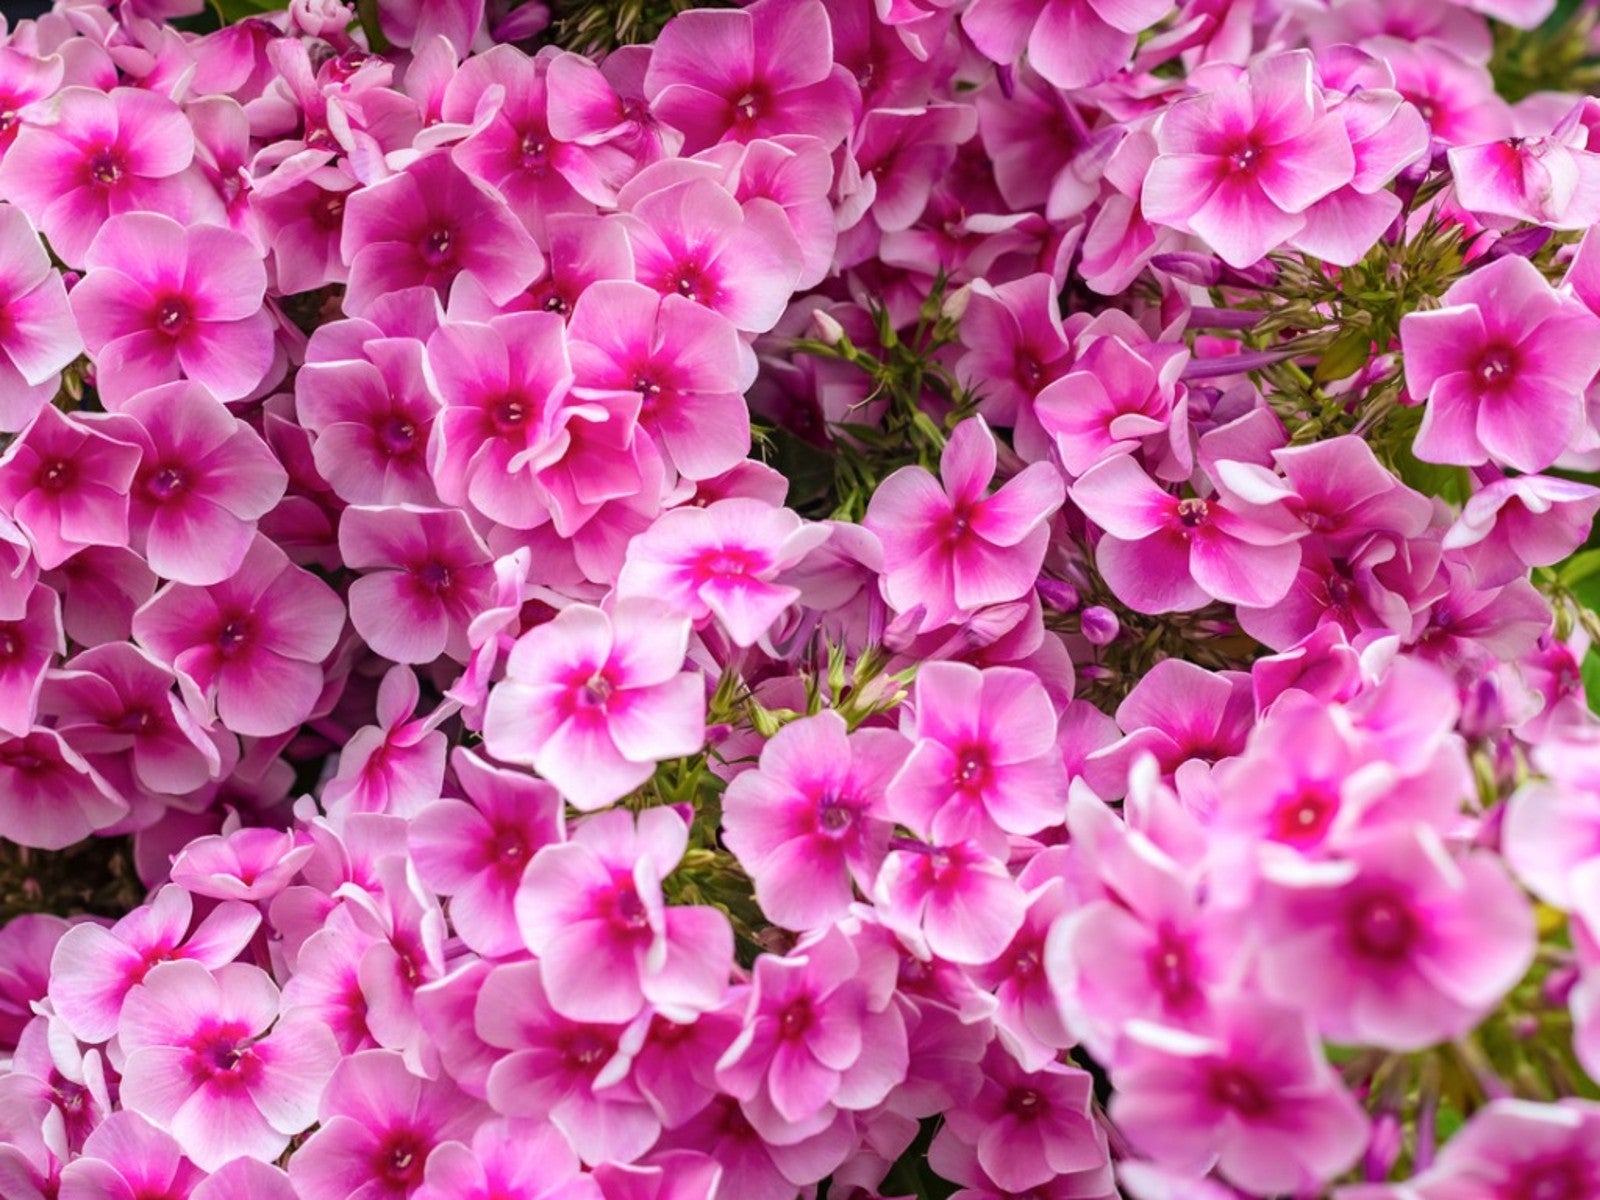 Gorgeous Pink Perennial Flowers - 10 Perennial Plants With Pink Flowers